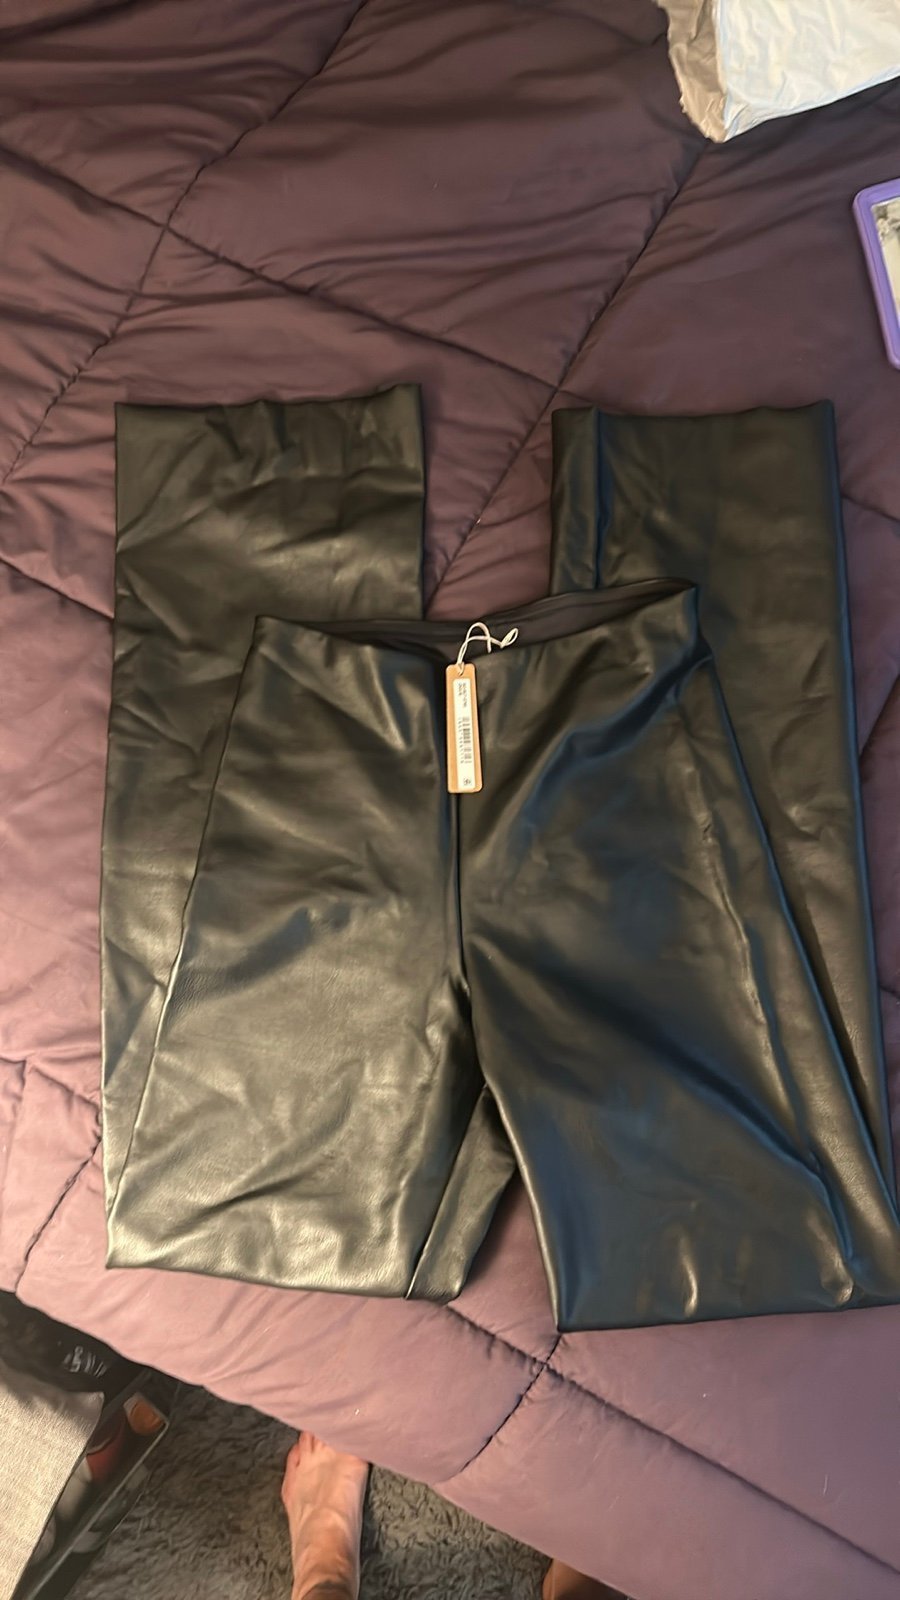 high discount NWT SKIMS FAUX LEATHER PANTS lvp7omjom Ne